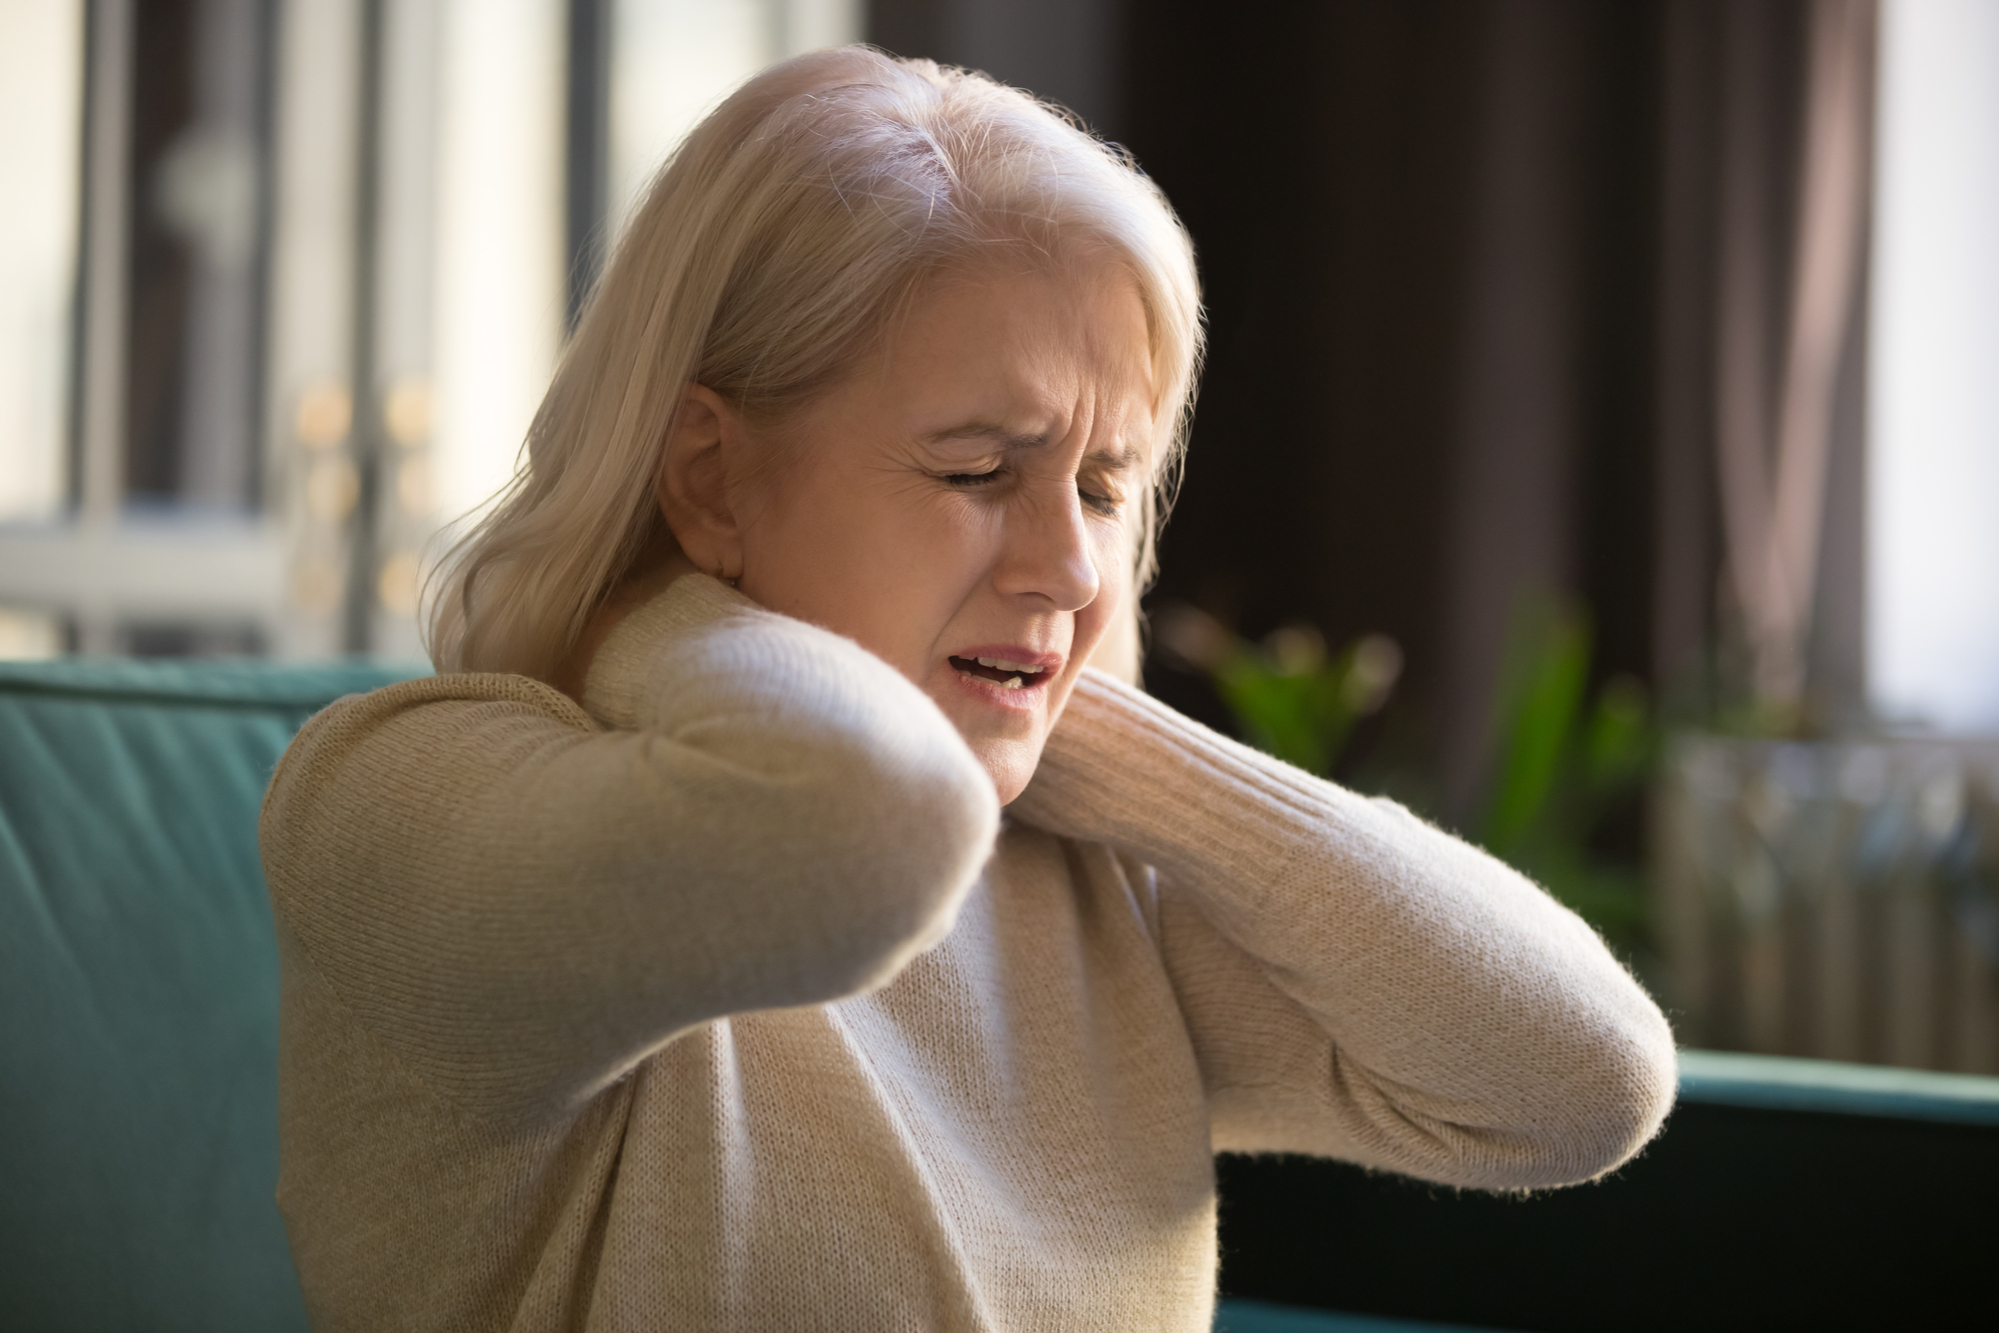 Can Fibromyalgia Make You Eligible for Disability Benefits?